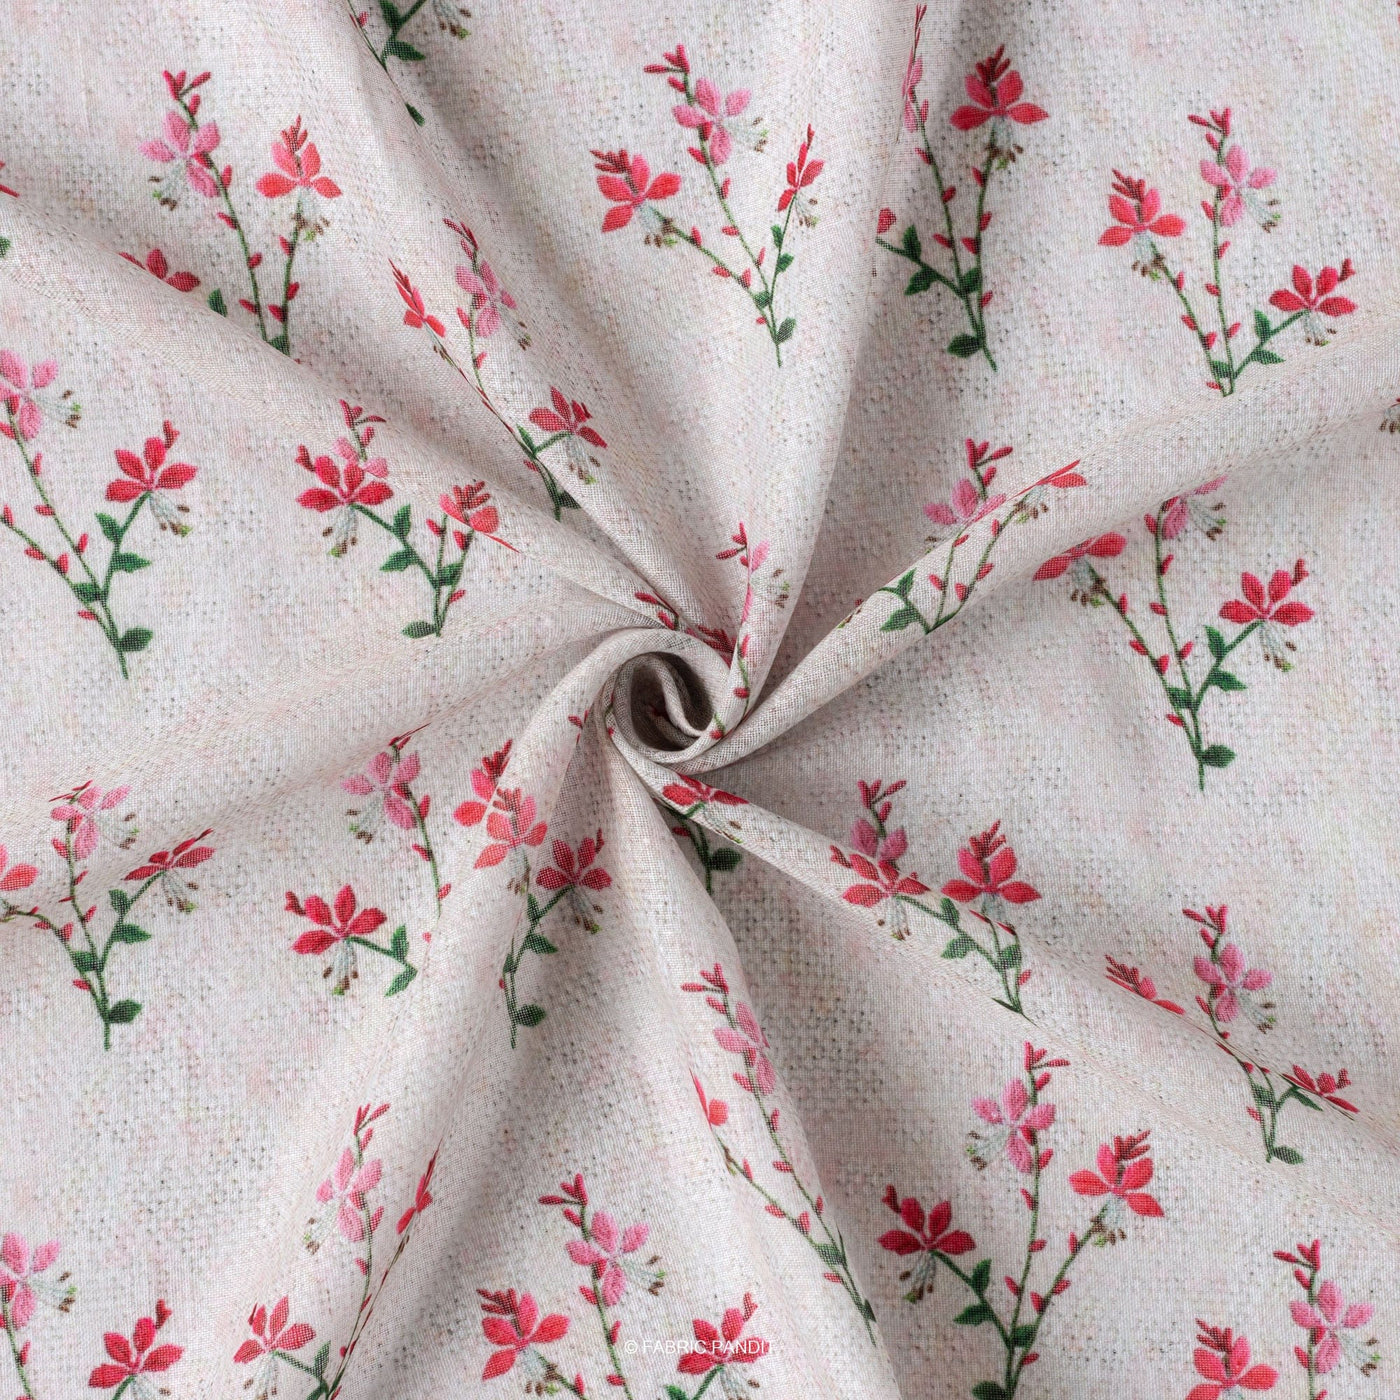 Fabric Pandit Cut Piece (Cut Piece) Grey and Red Tri-Flower Bunch Digital Printed Linen Neps Fabric (Width 44 Inches)